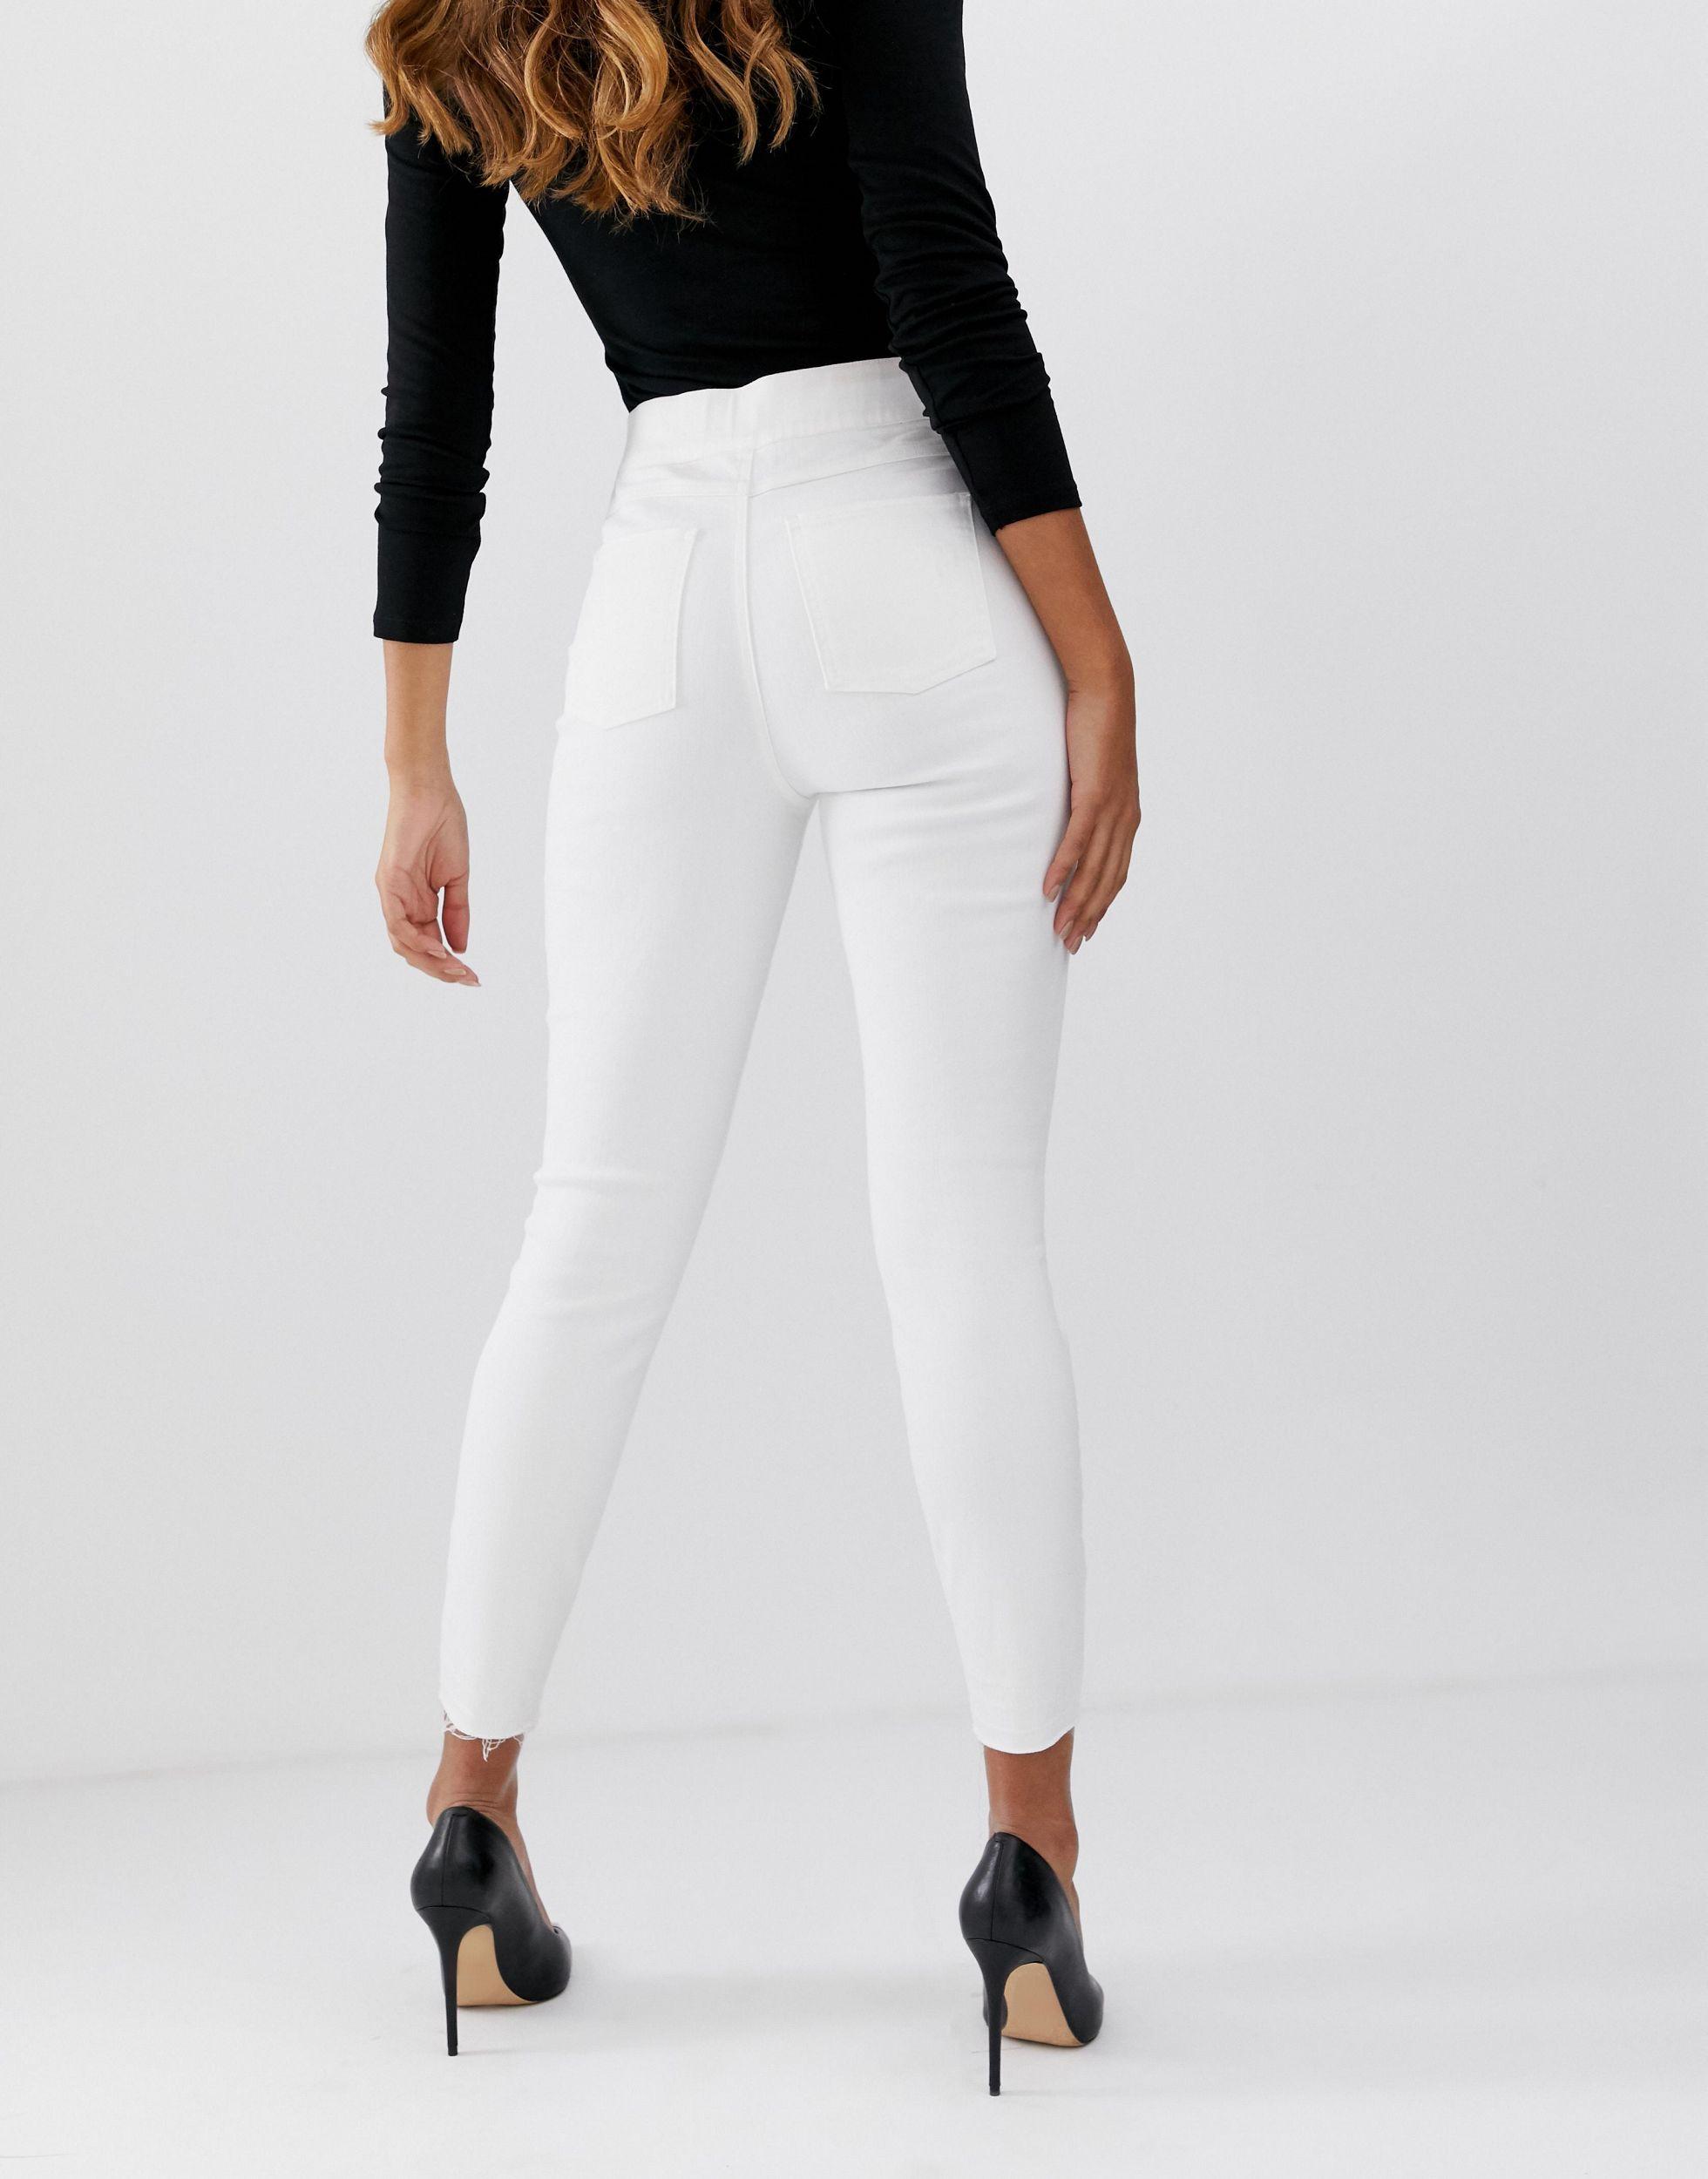 Spanx Shape And Lift Distressed Skinny Jeans in White